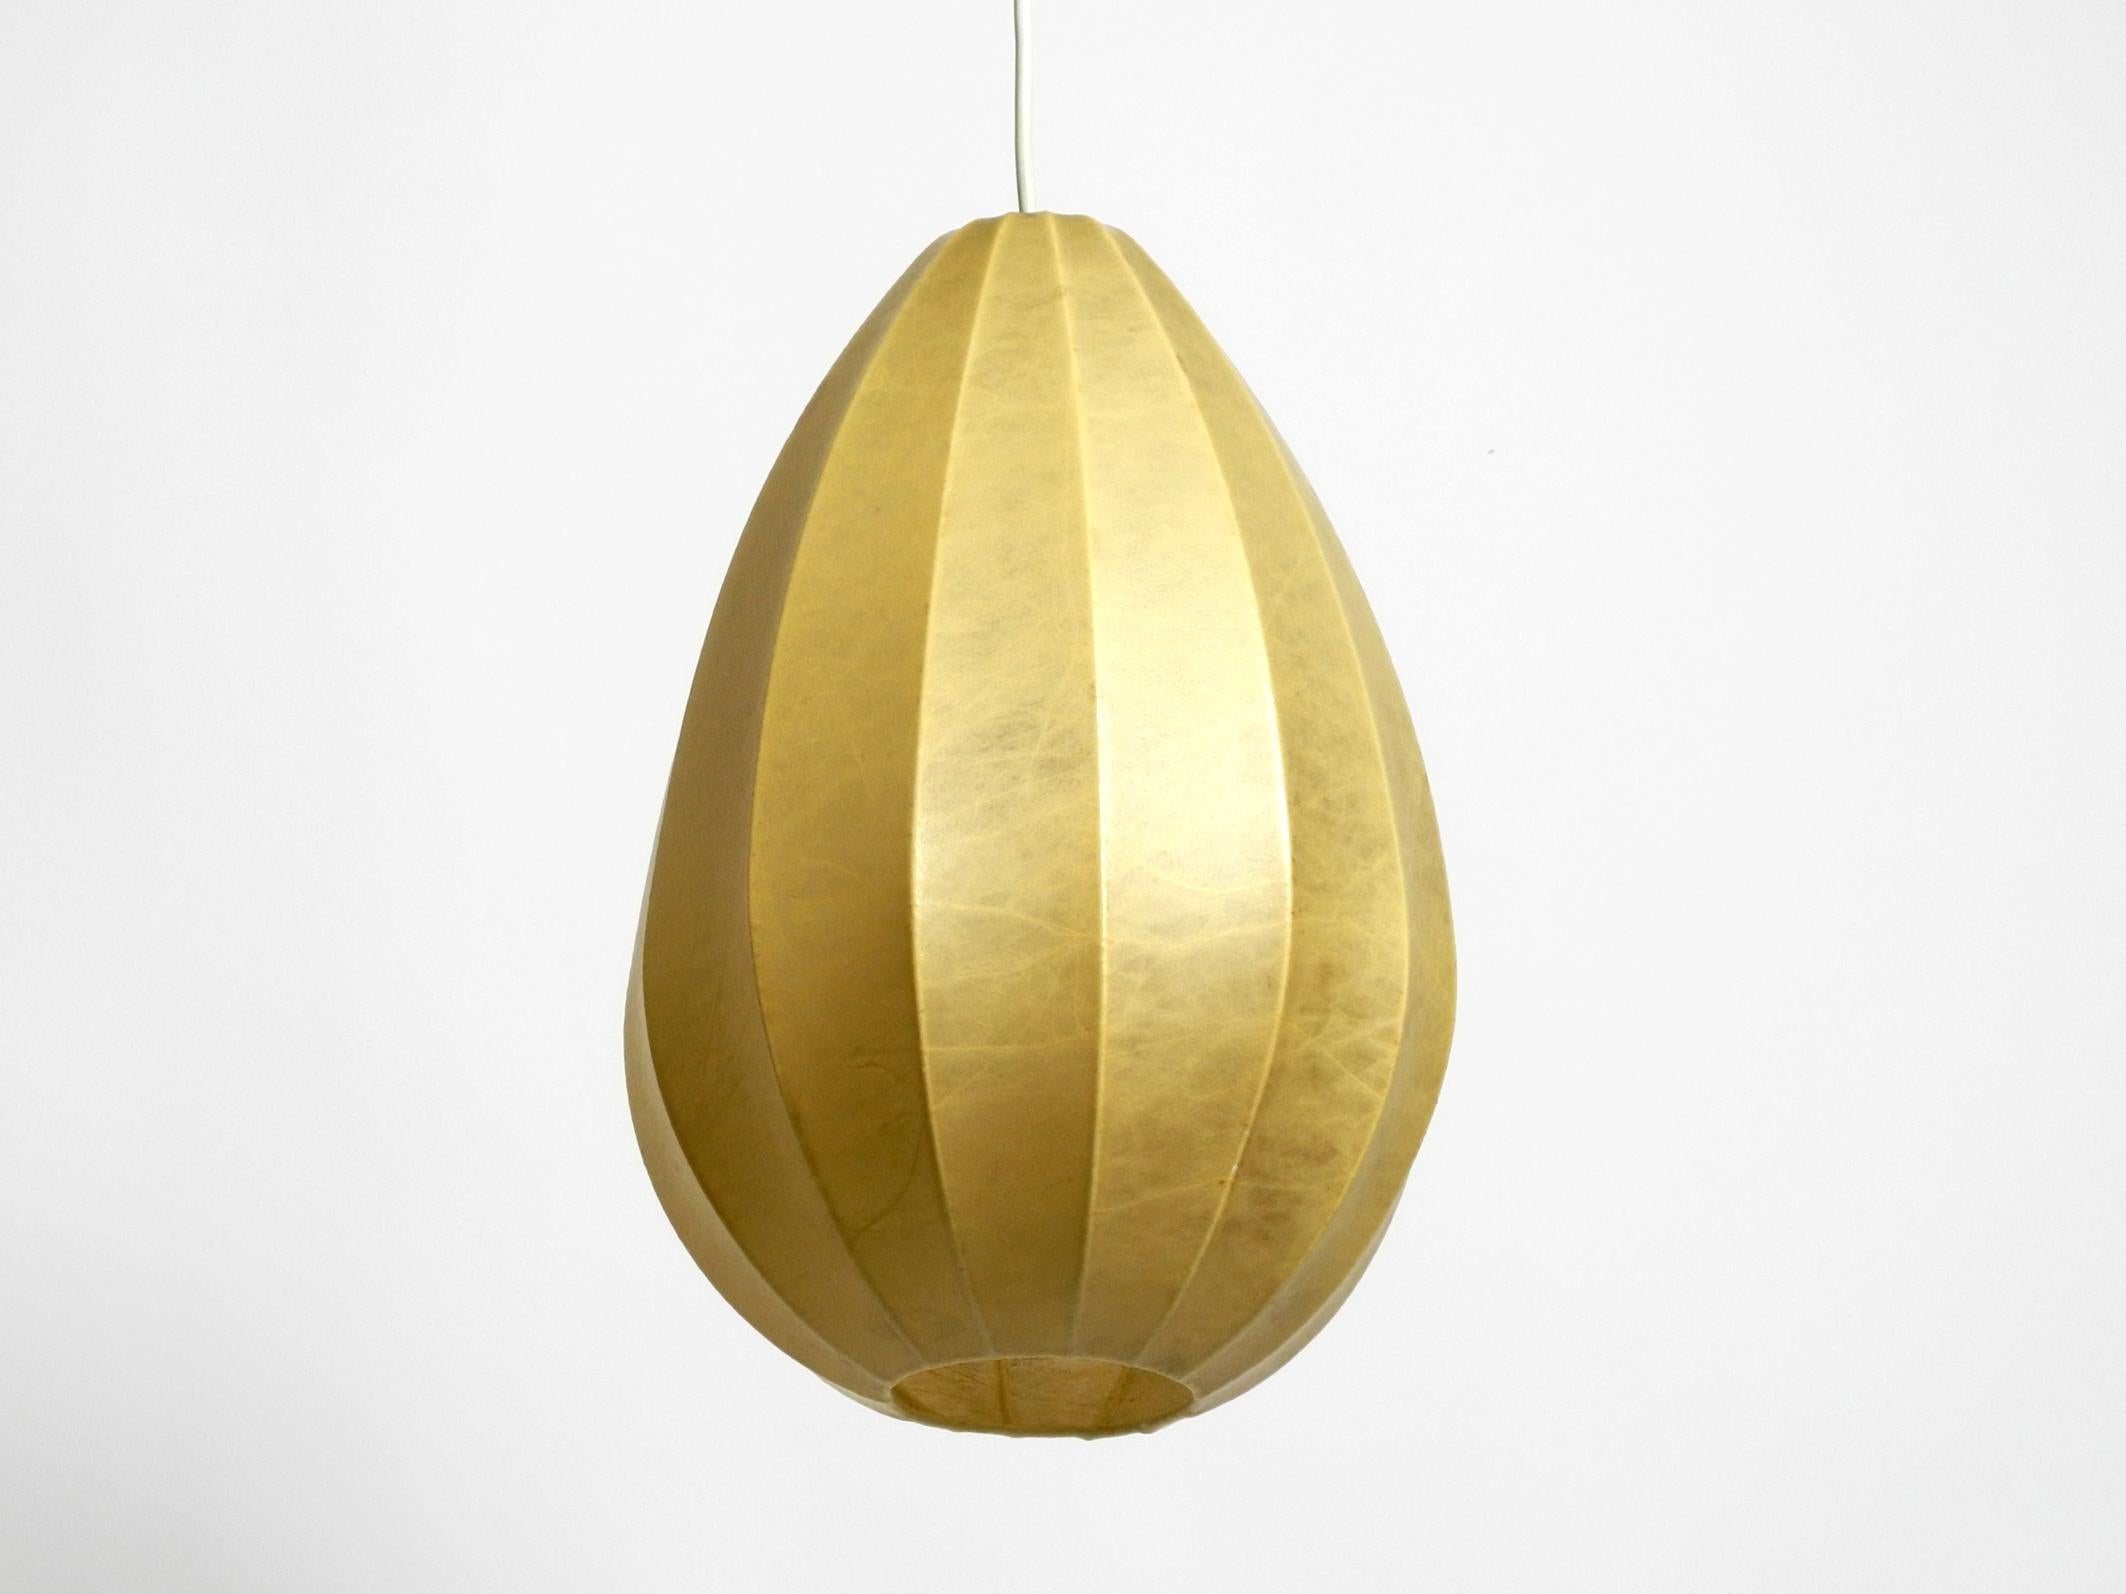 Very nice 1960s vintage Cocoon pendant lamp. Great minimalist design in this rare egg shape. Very good original vintage condition.
Creates a very pleasant warm light.
The cocoon shade has no damage, no tears or holes.
The shade has become a bit dark